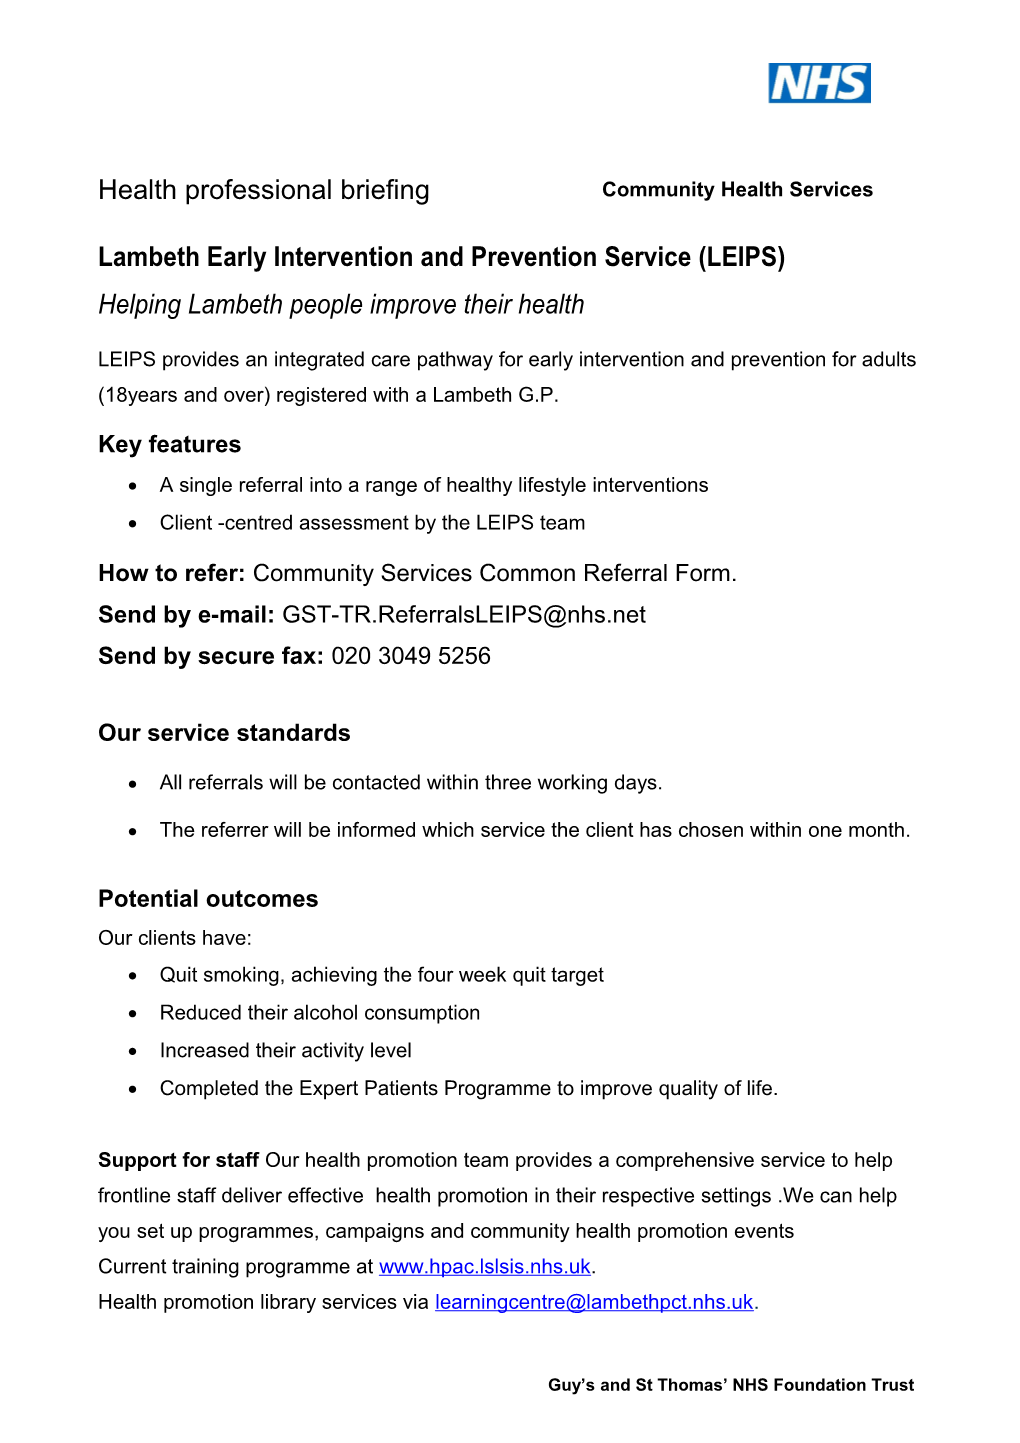 Lambeth Early Intervention and Prevention Service (LEIPS)